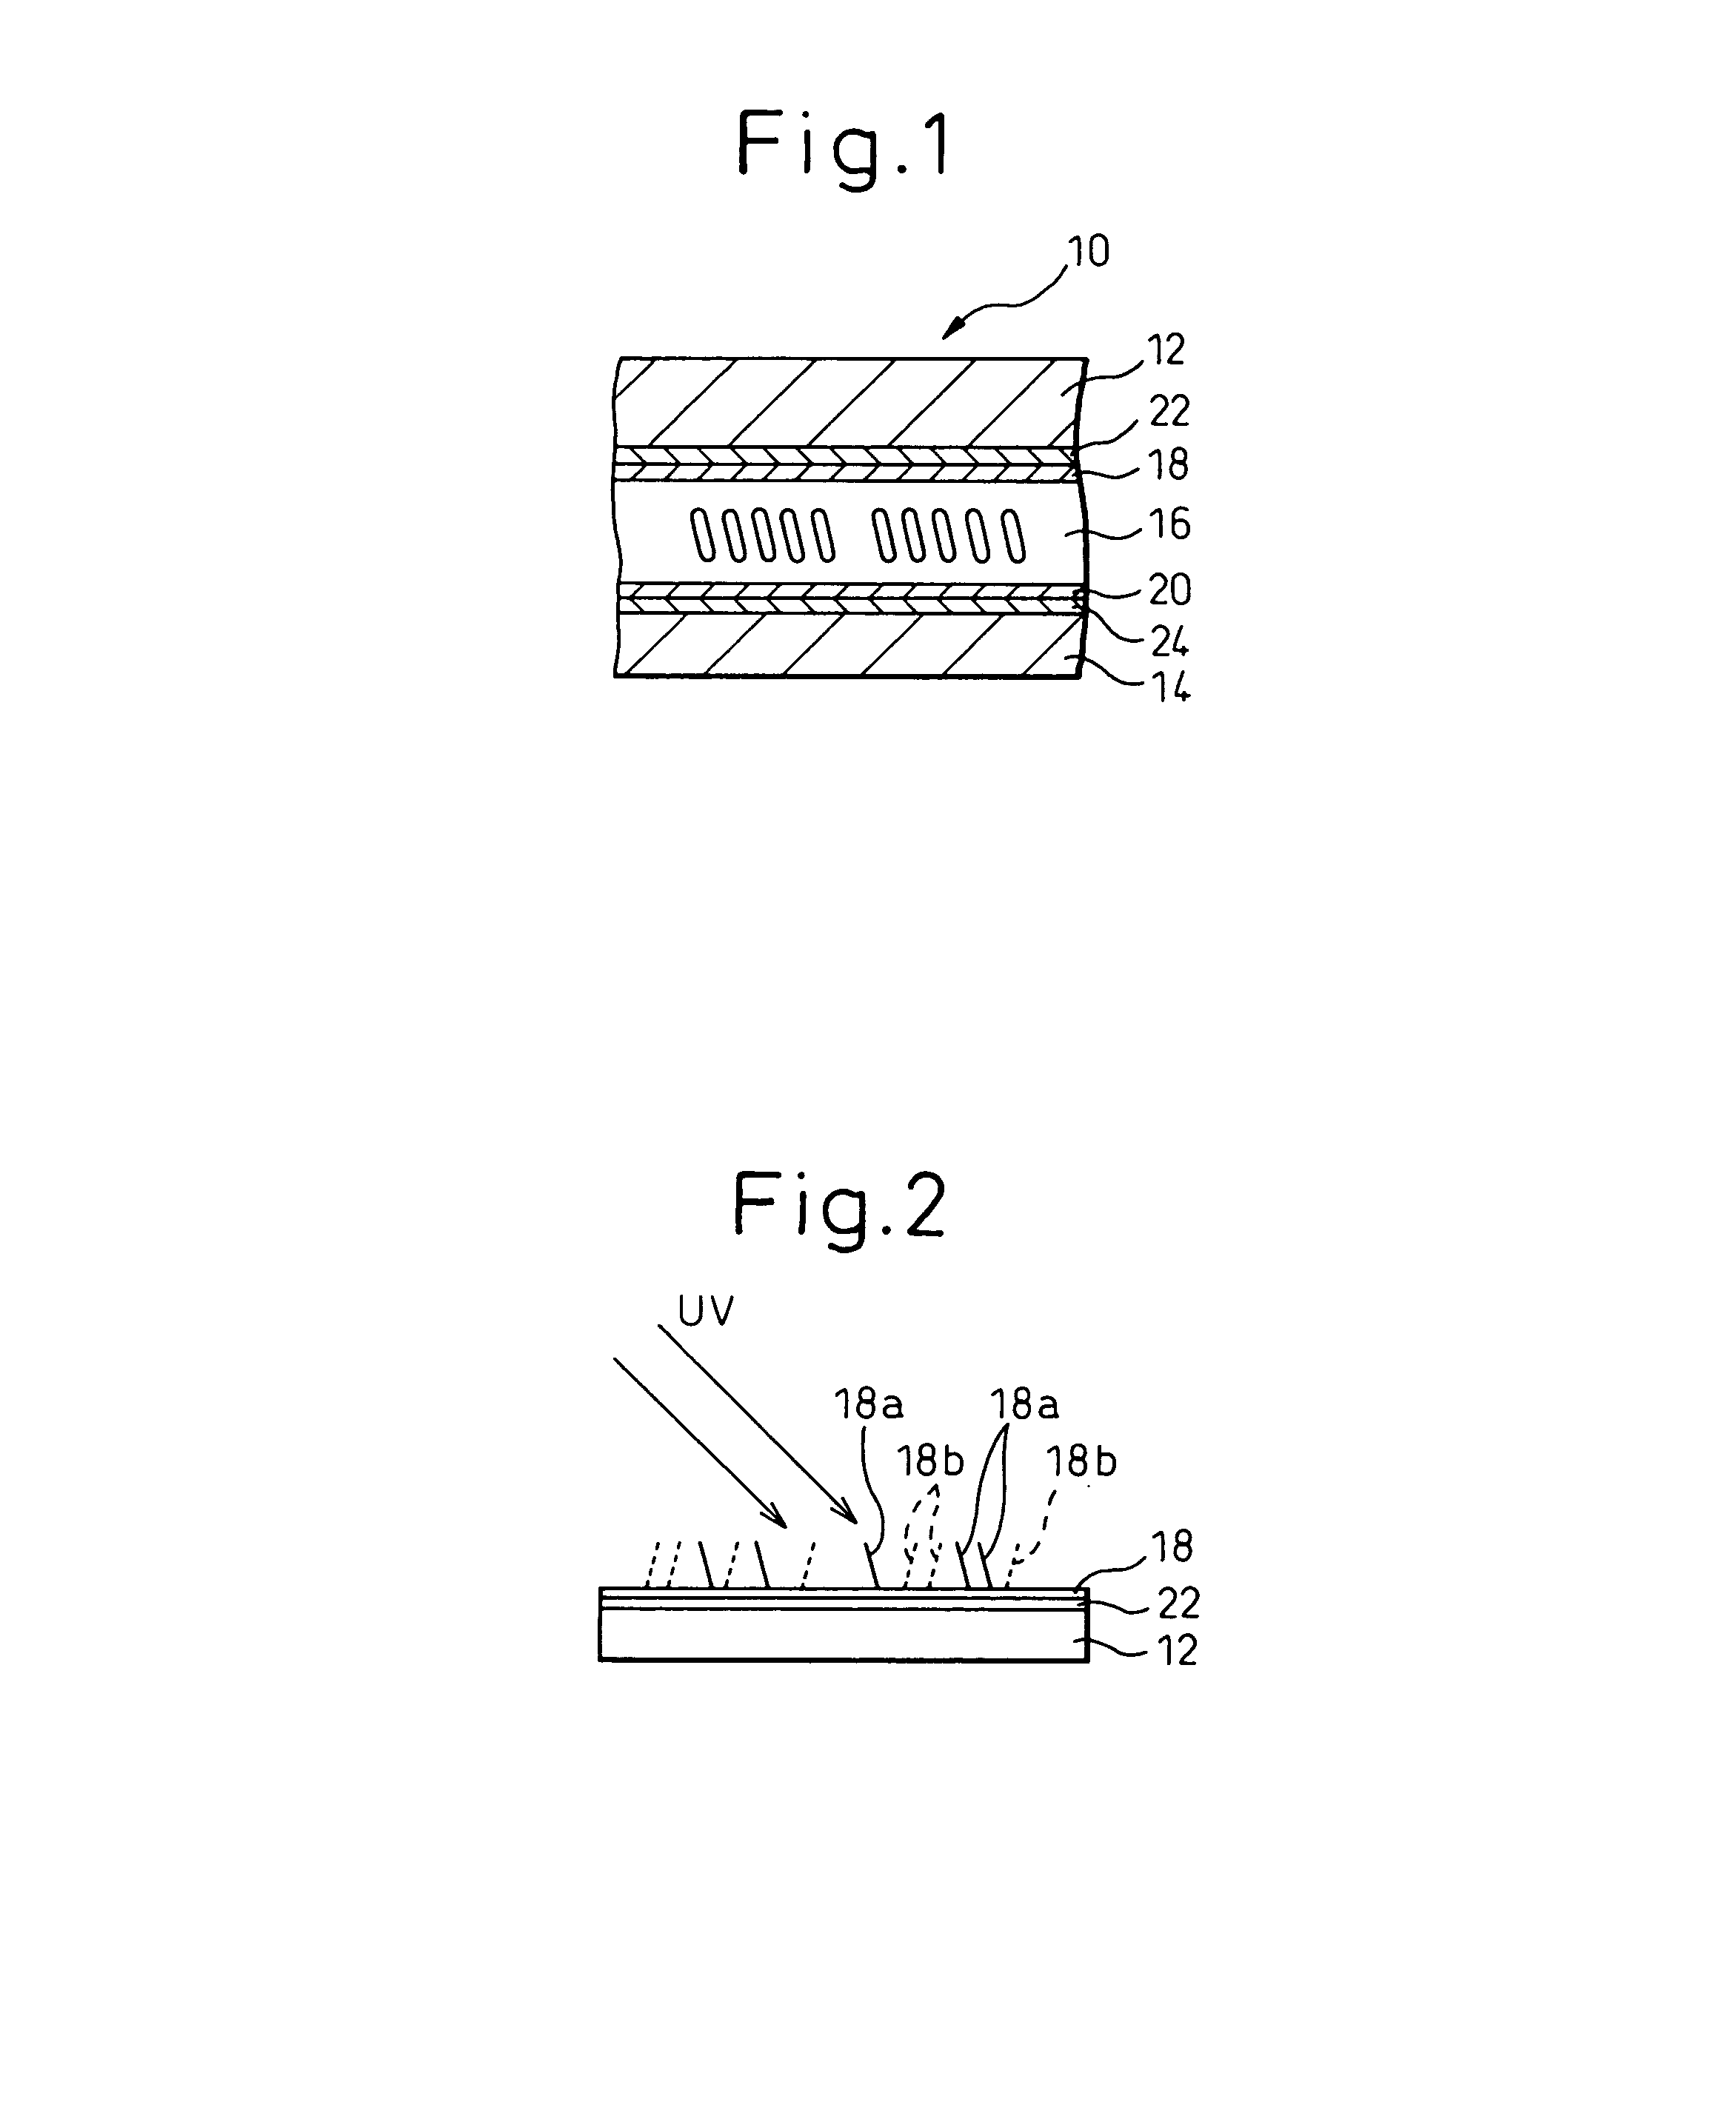 Liquid crystal display device with alignment layer including a diamine component and treated by UV irradiation